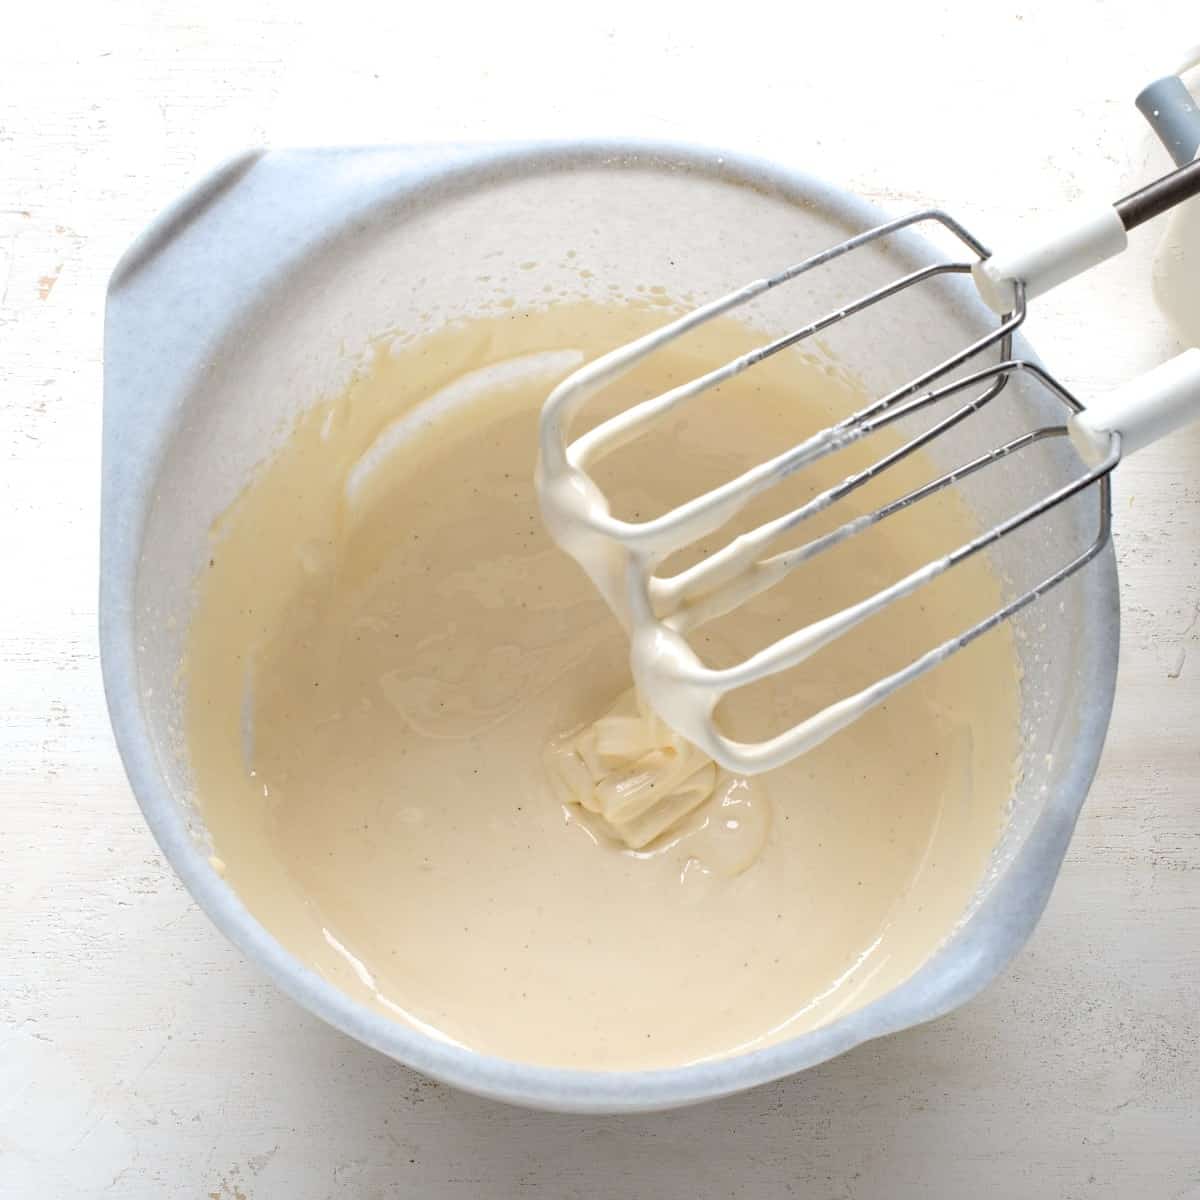 Whipped eggs with sugar in a light gray bowl, using a handheld electric mixer.